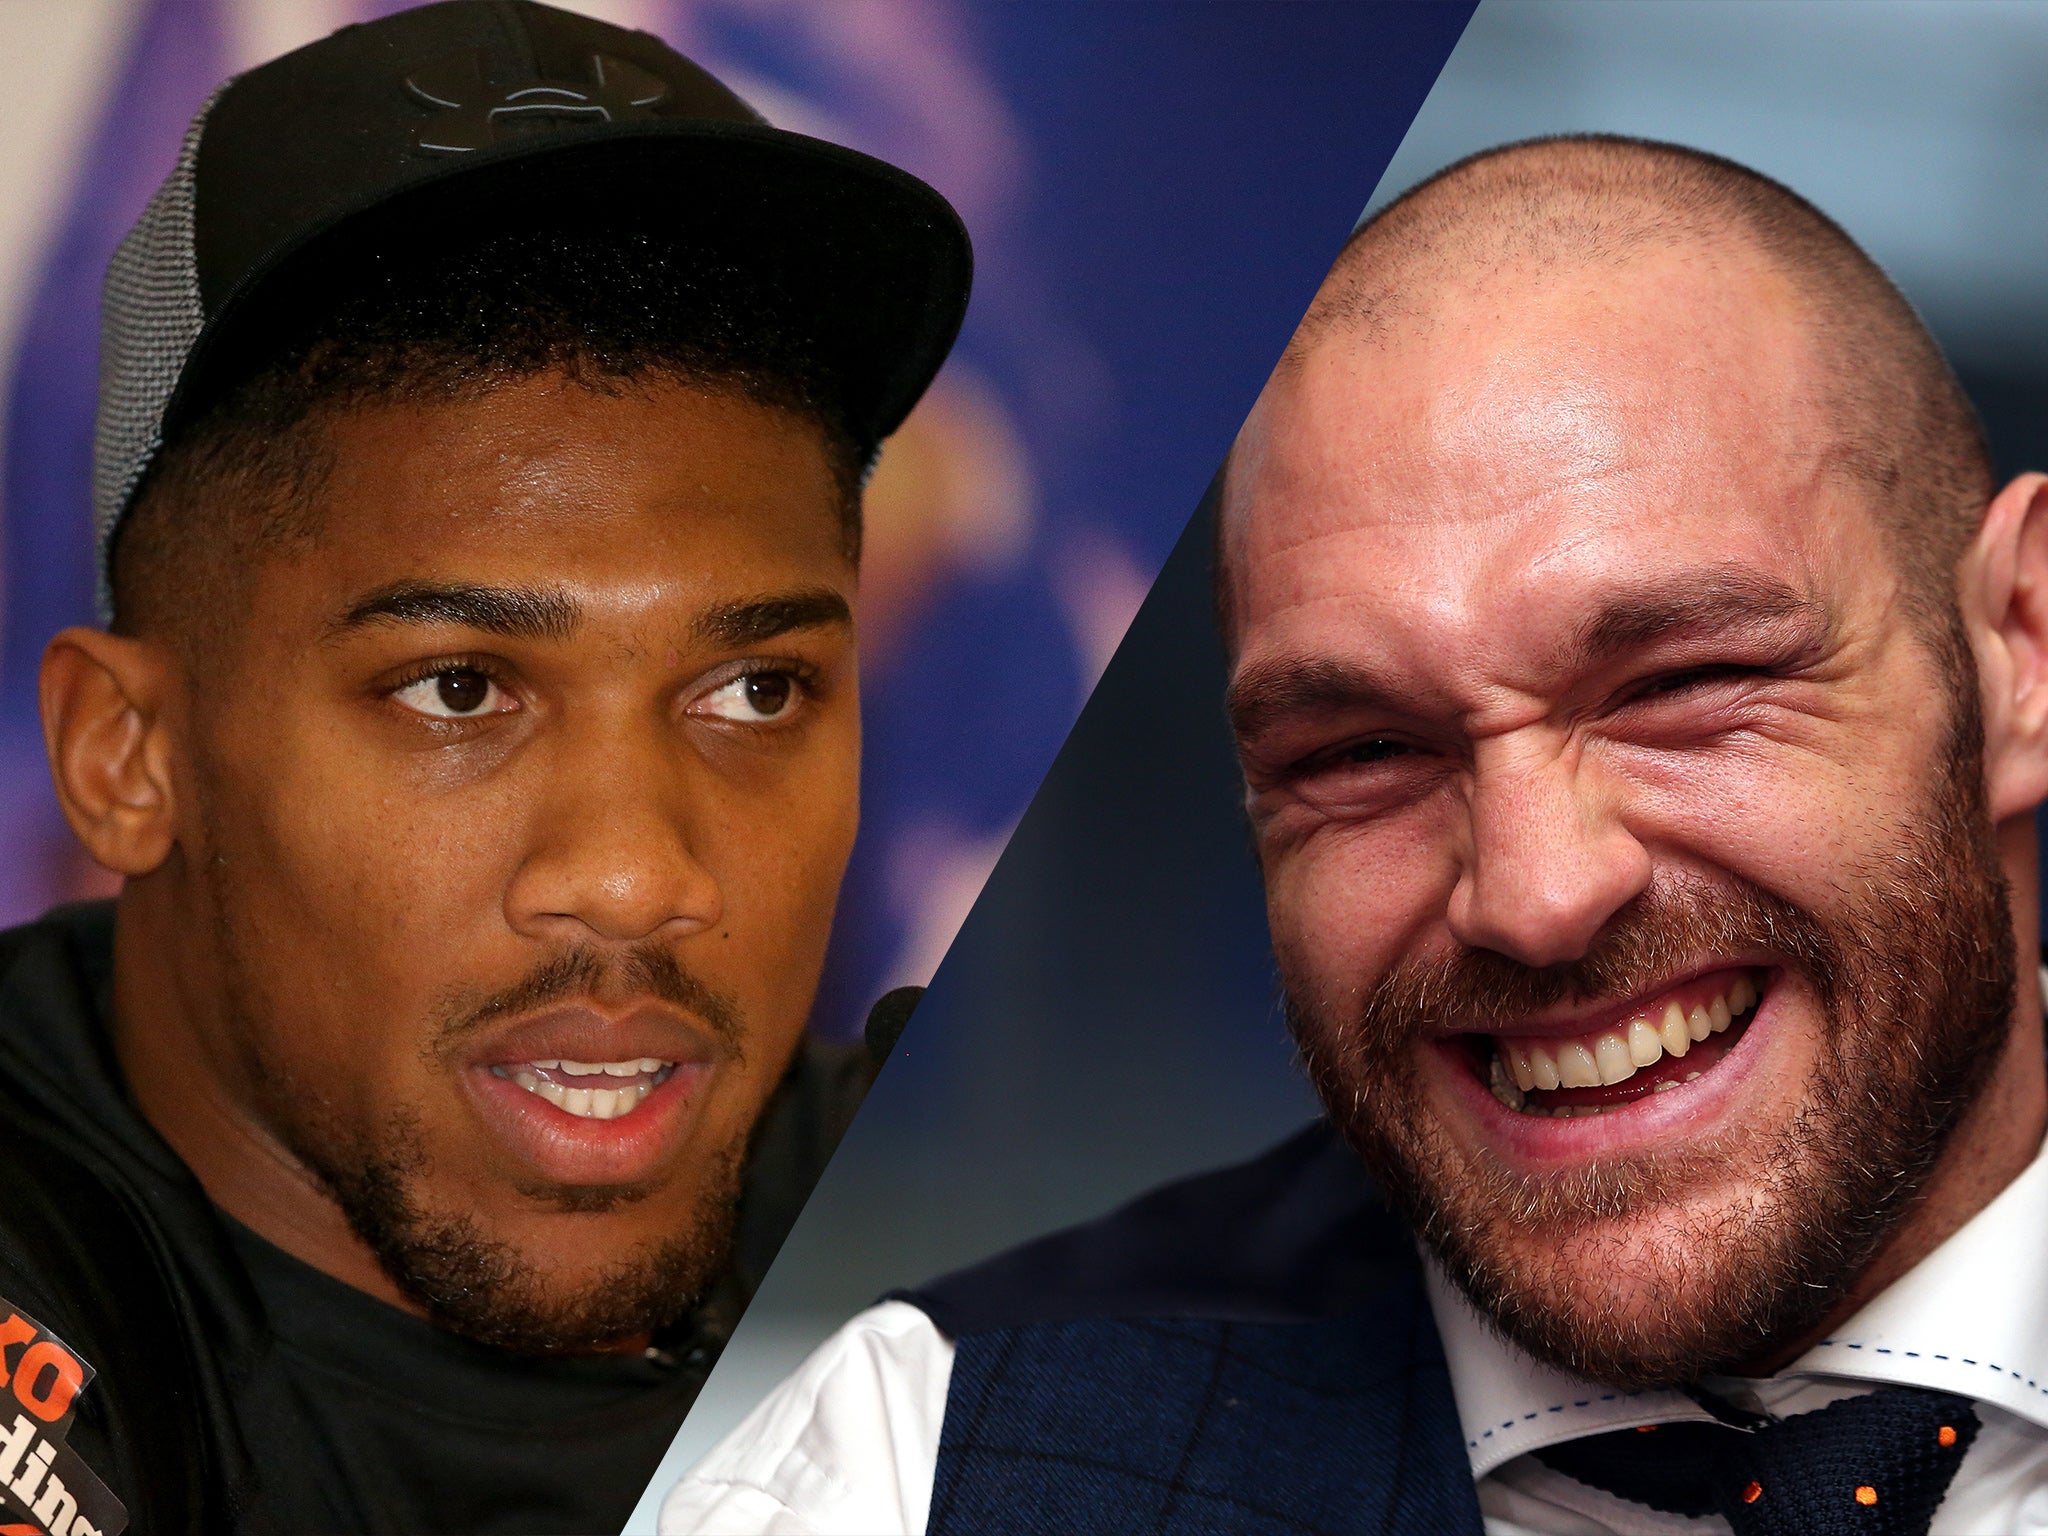 Anthony Joshua has challenged Tyson Fury to get in shape if he is to fight him